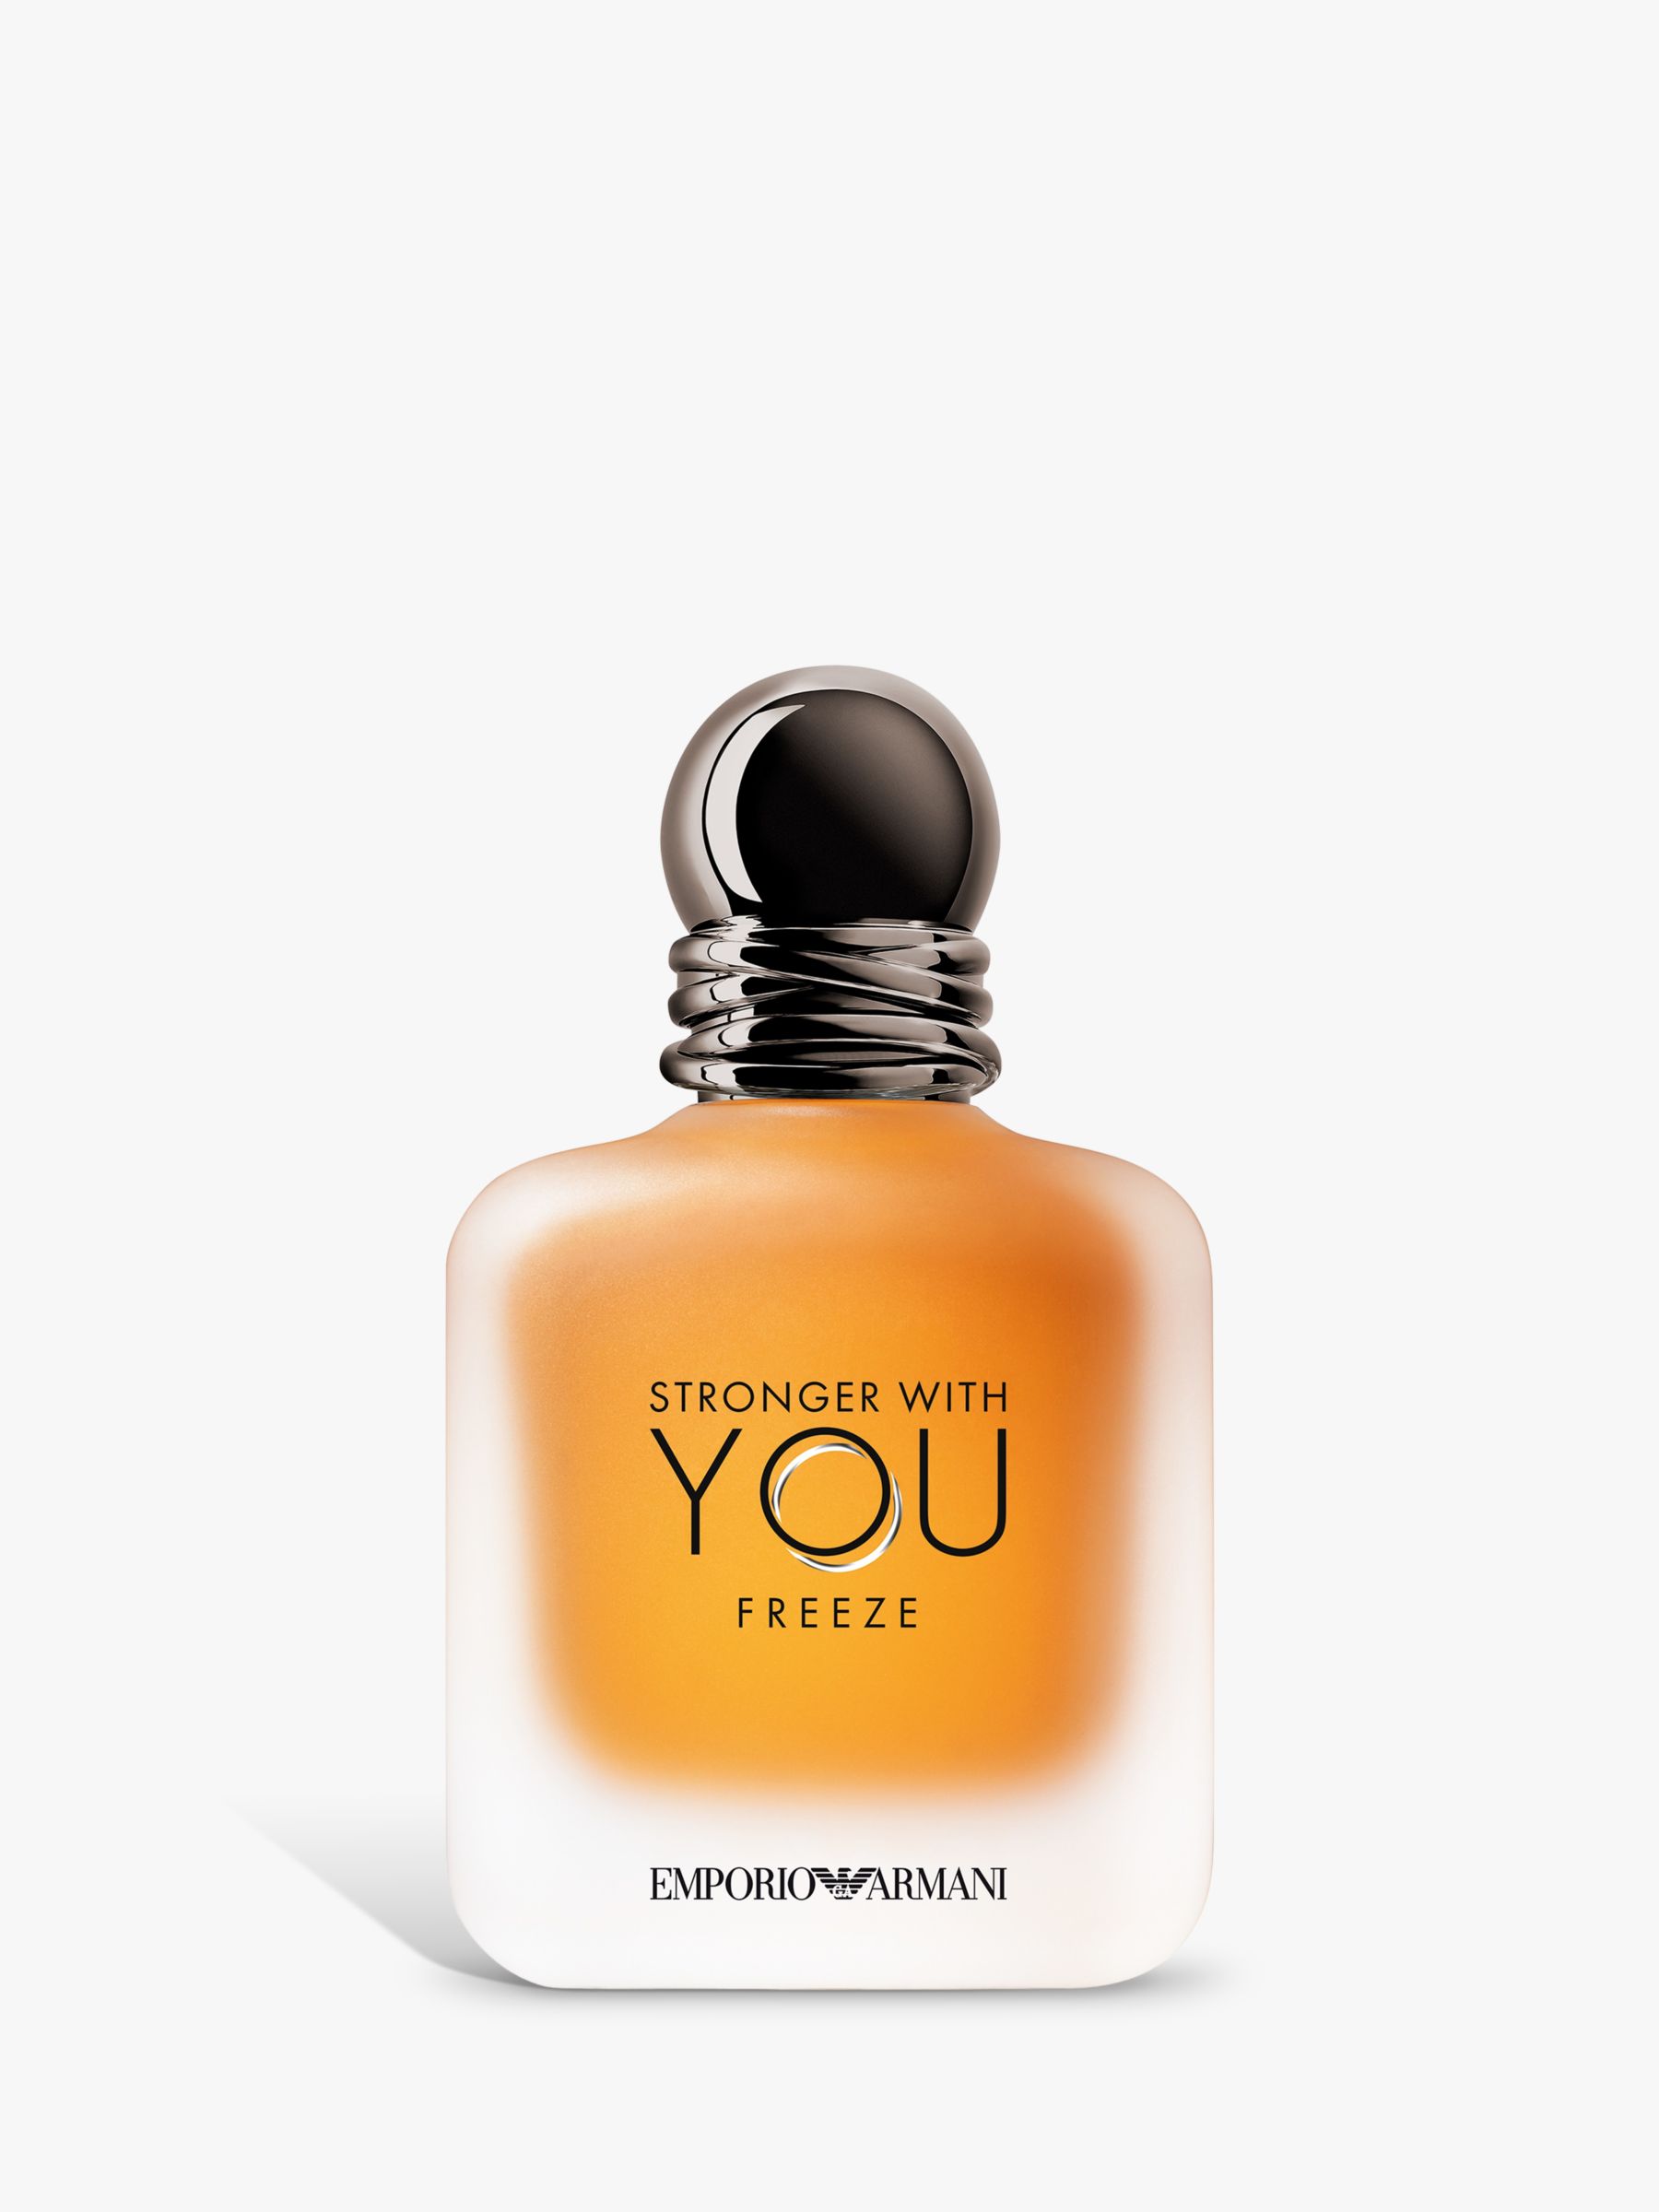 Emporio Armani Stronger With You Freeze 